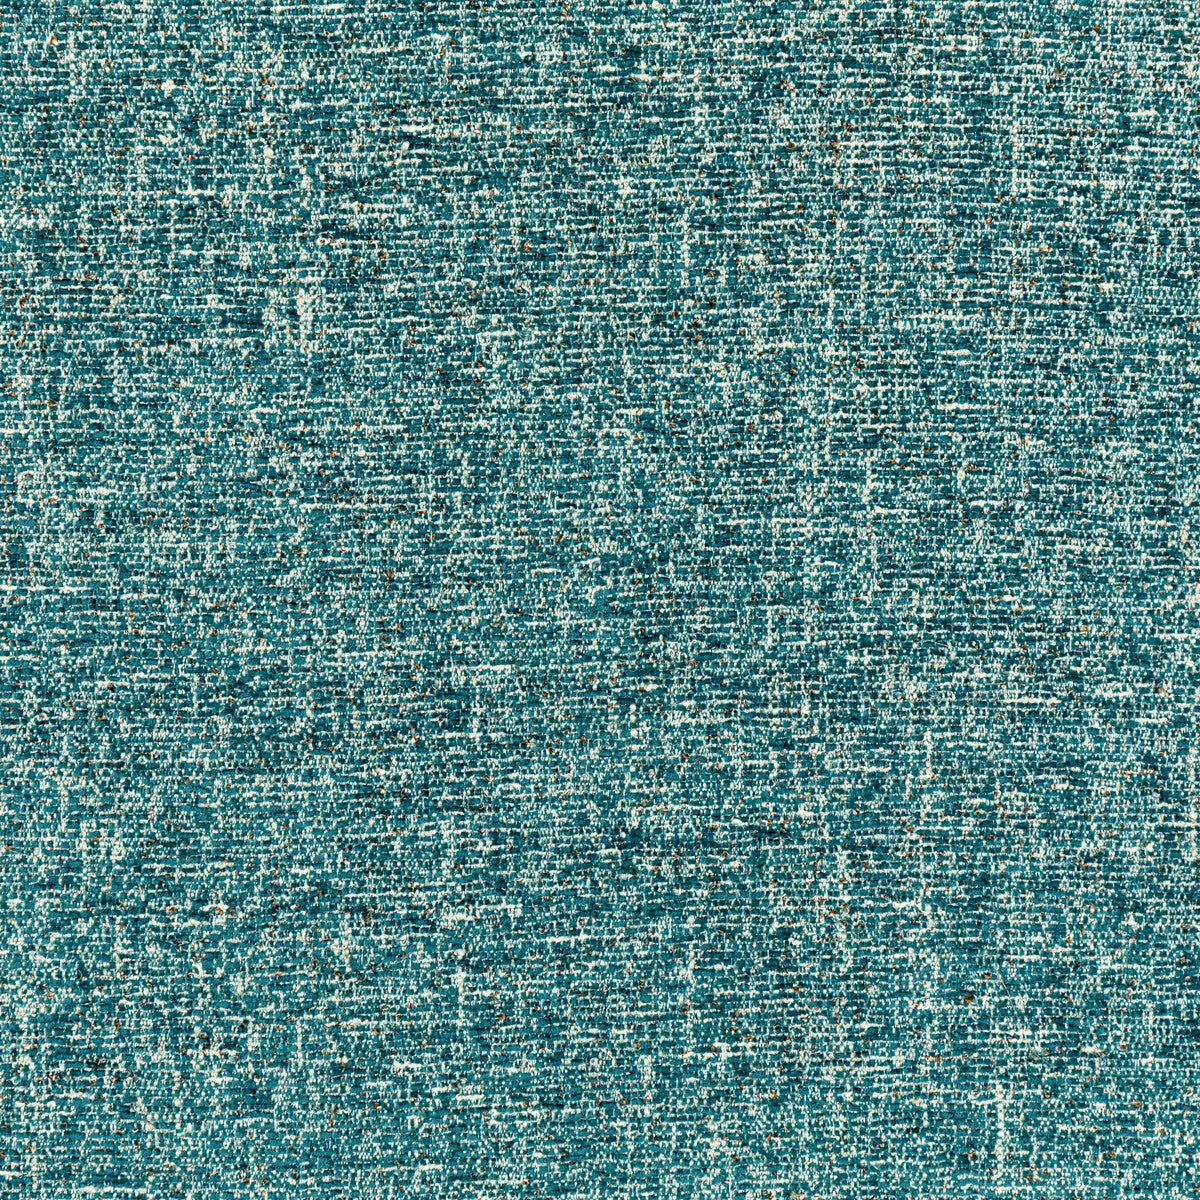 Leading Lady fabric in teal color - pattern 36109.3535.0 - by Kravet Couture in the Luxury Textures II collection